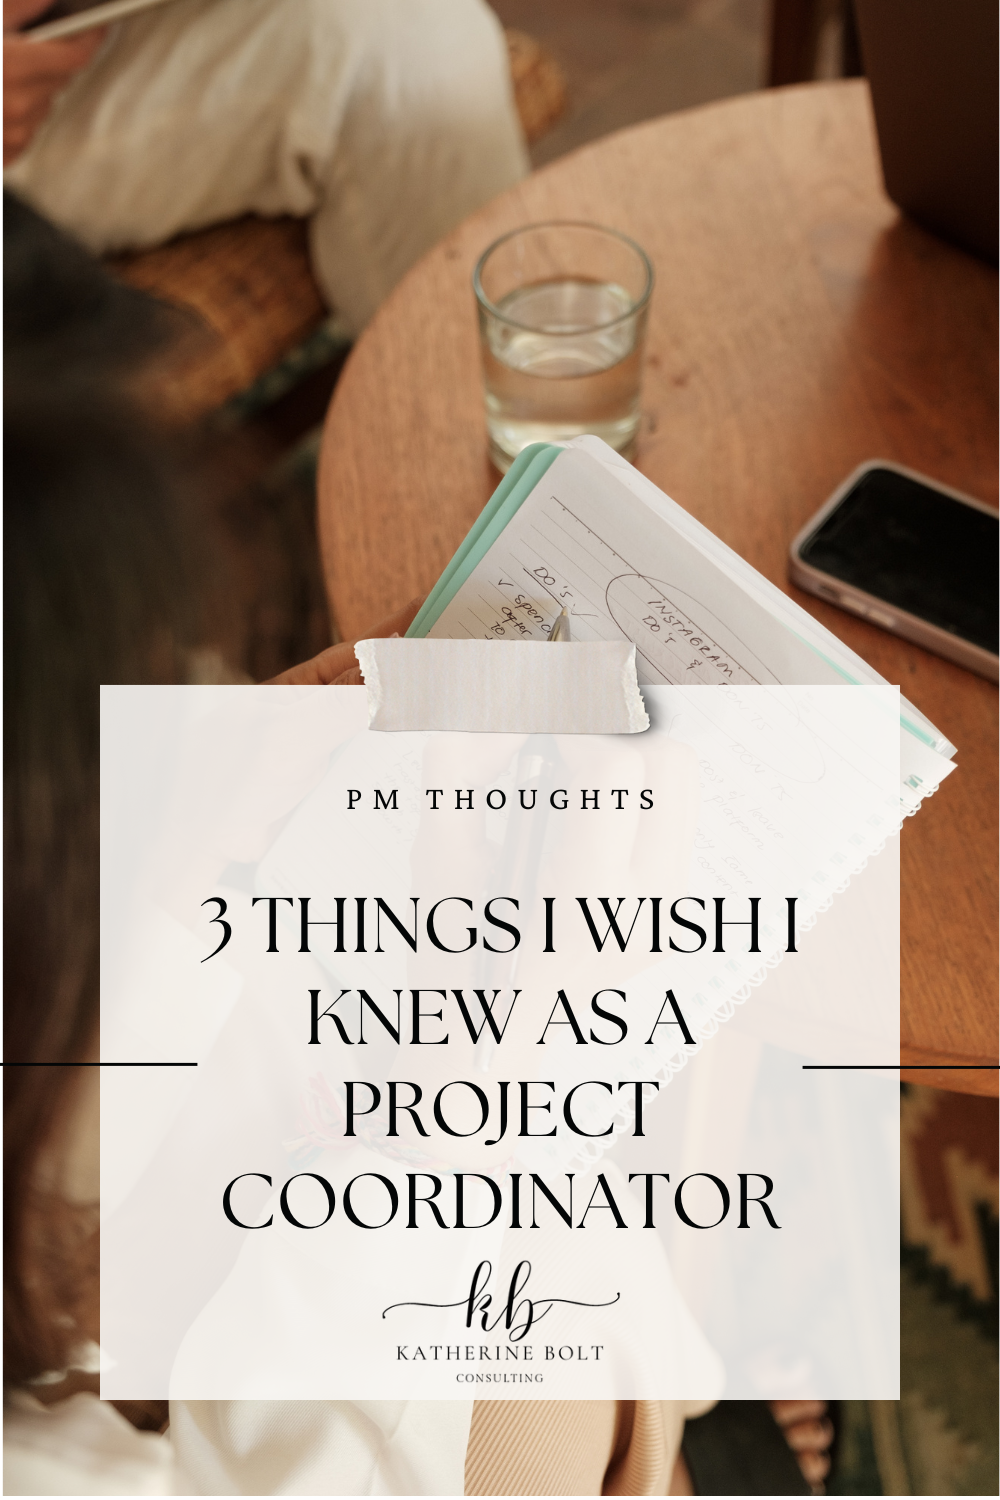 3 Things I Wish I Knew as a Project Coordinator